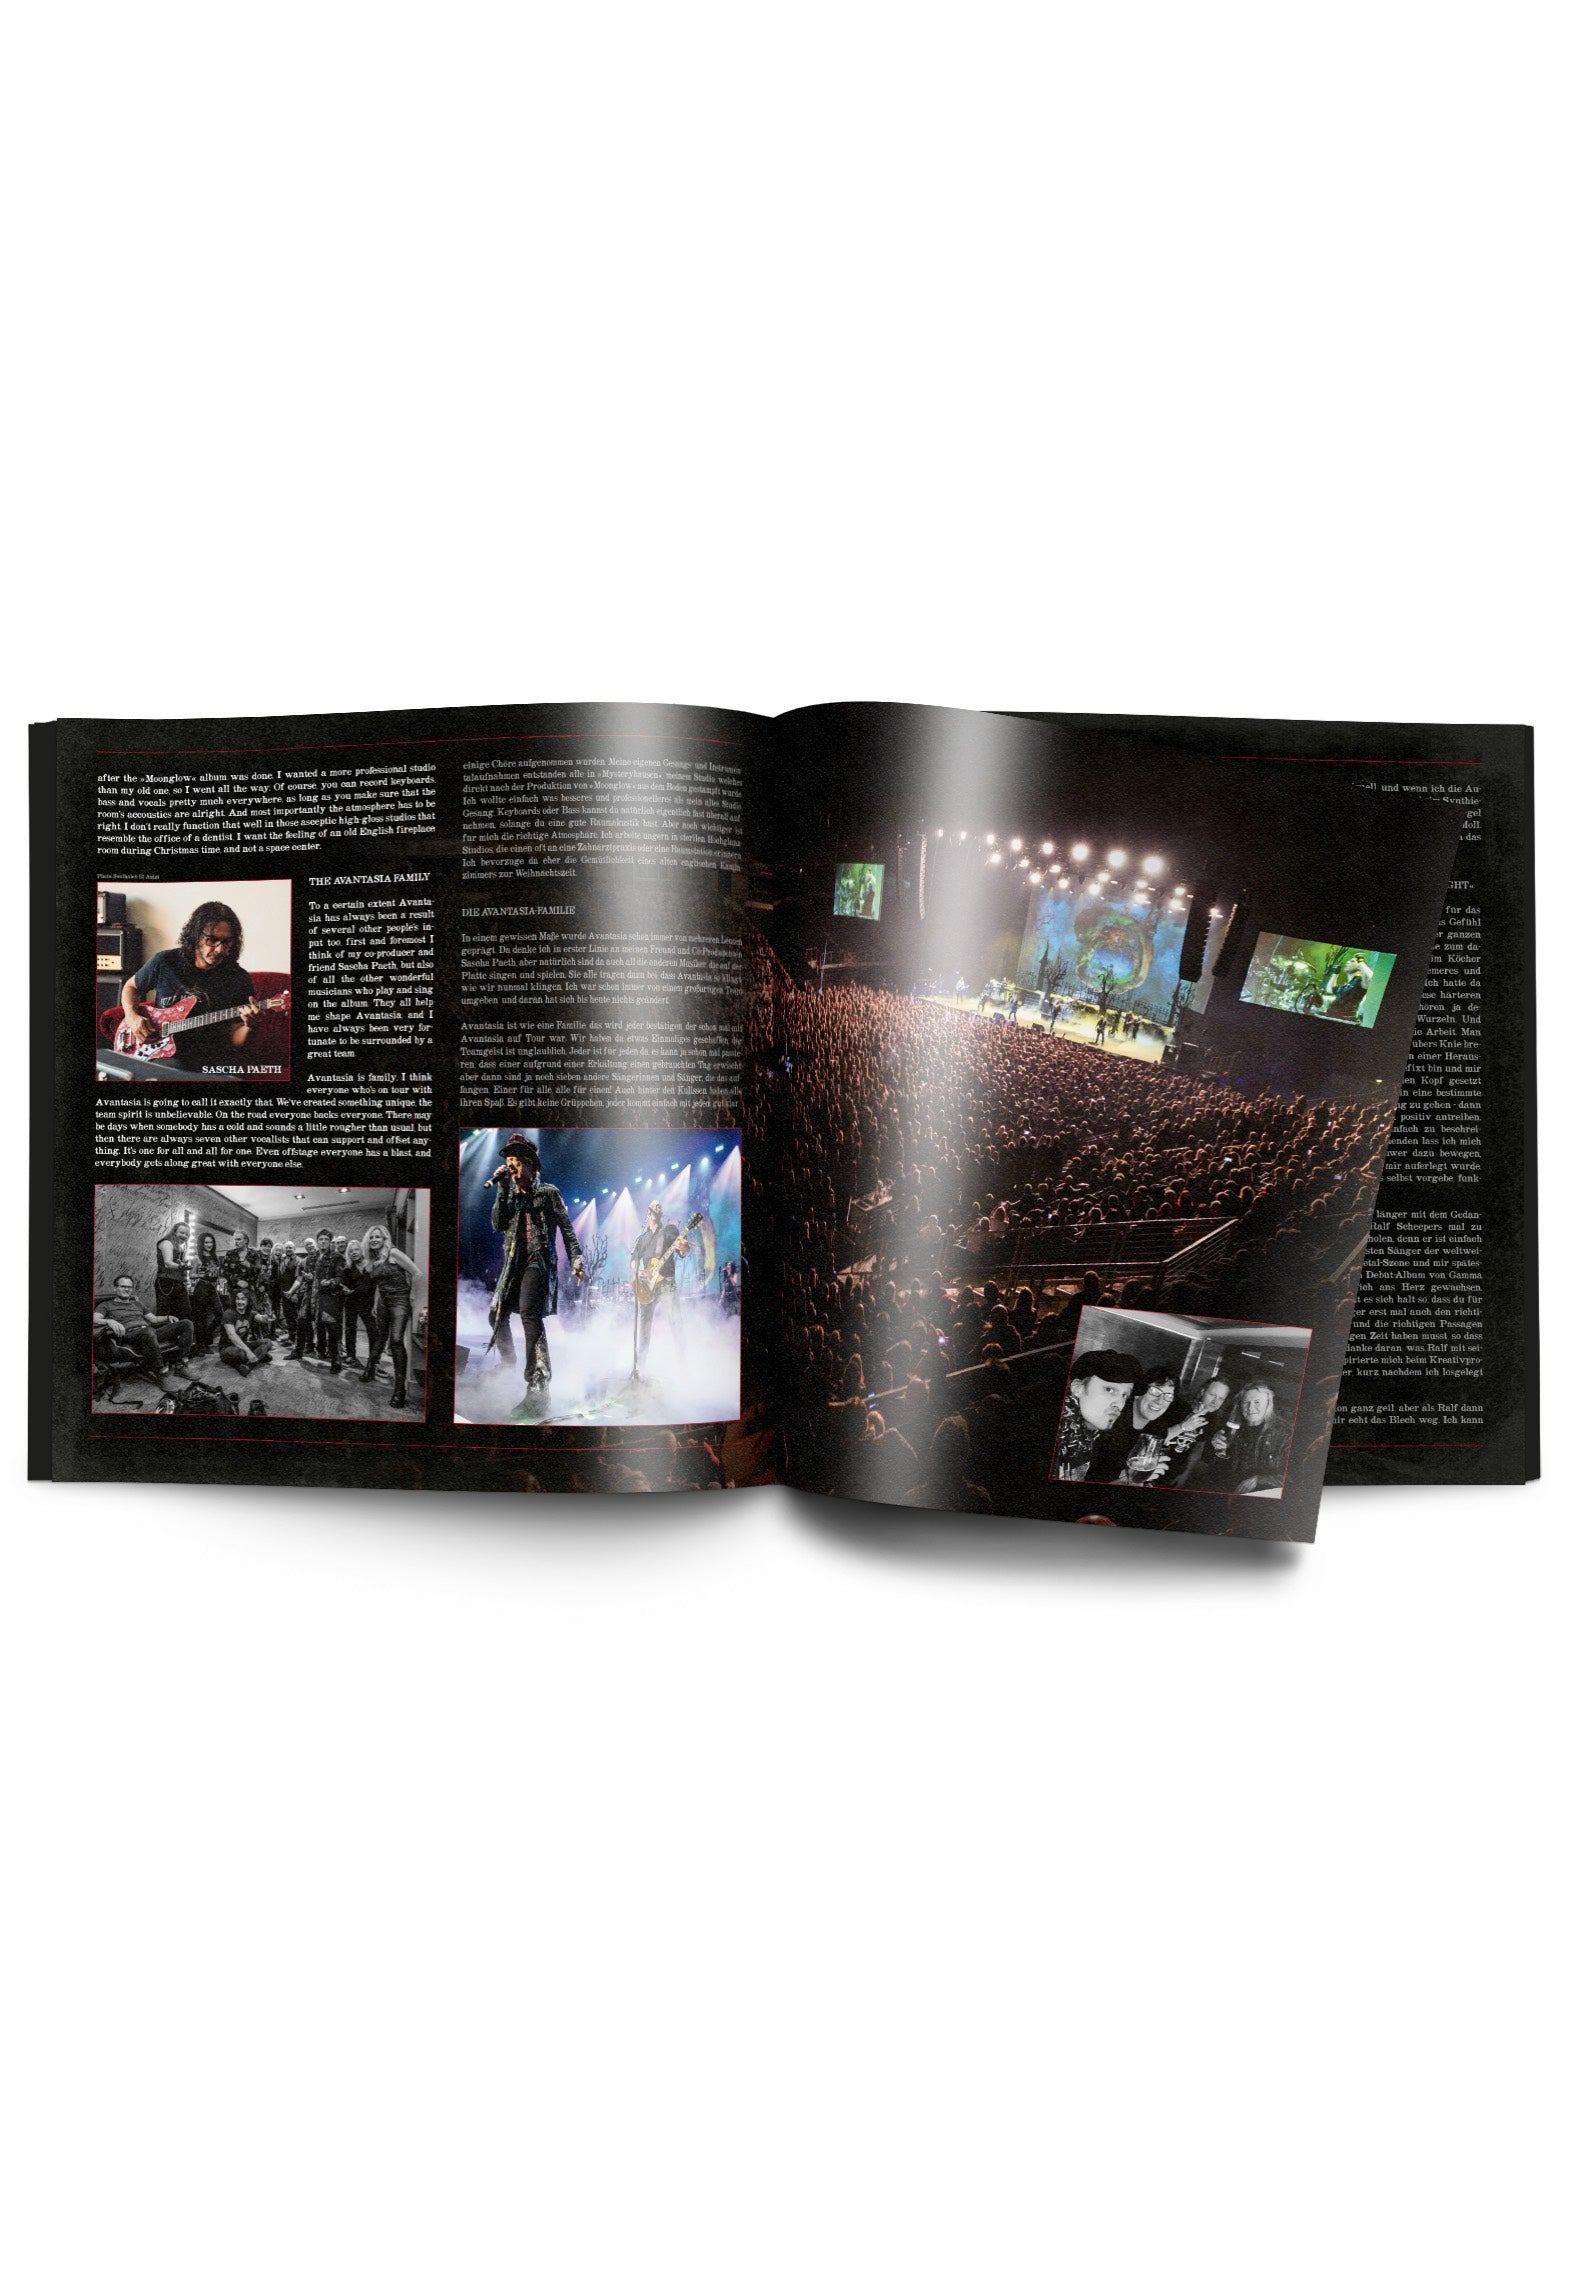 Avantasia - A Paranormal Evening with the Moonflower Society Ltd. Artbook incl. Instrumentals - 2 CD